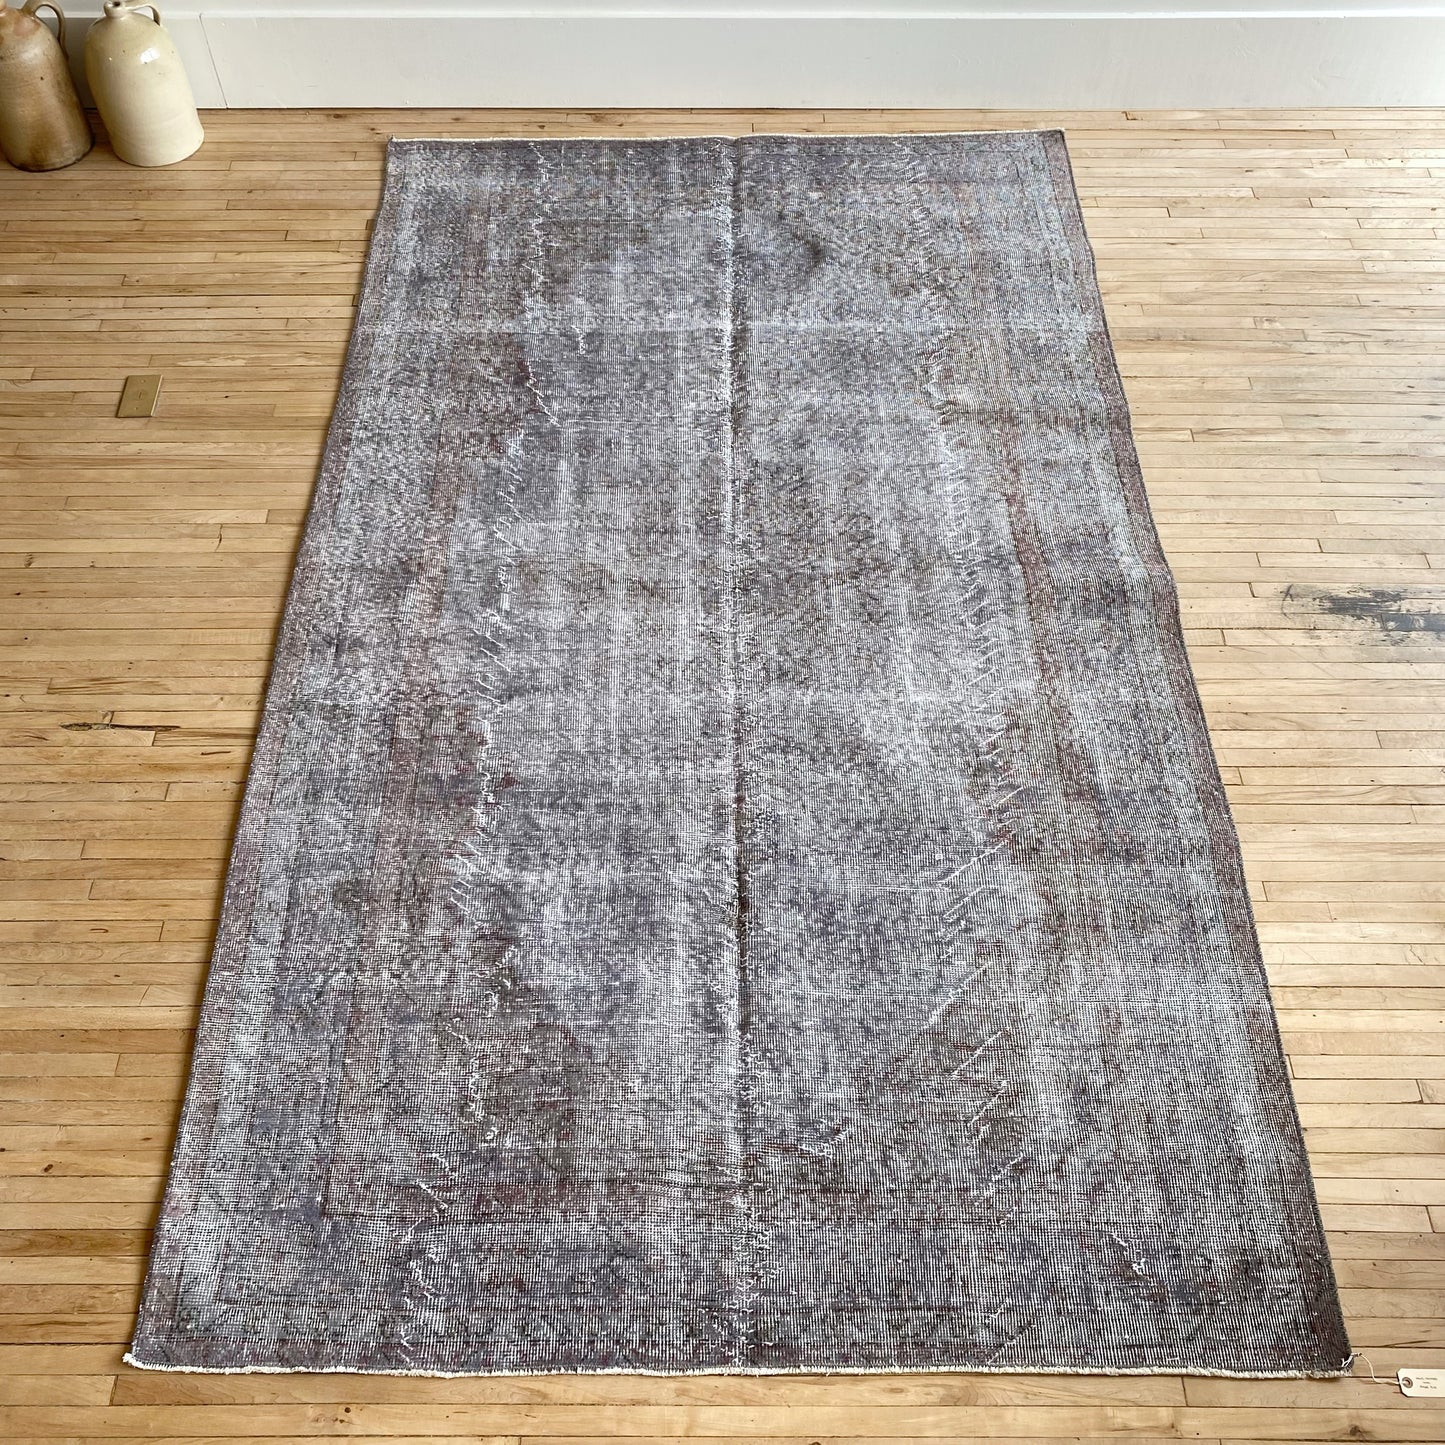 ASHTON : Hand-knotted Area Rug (5.6 x 9.5)